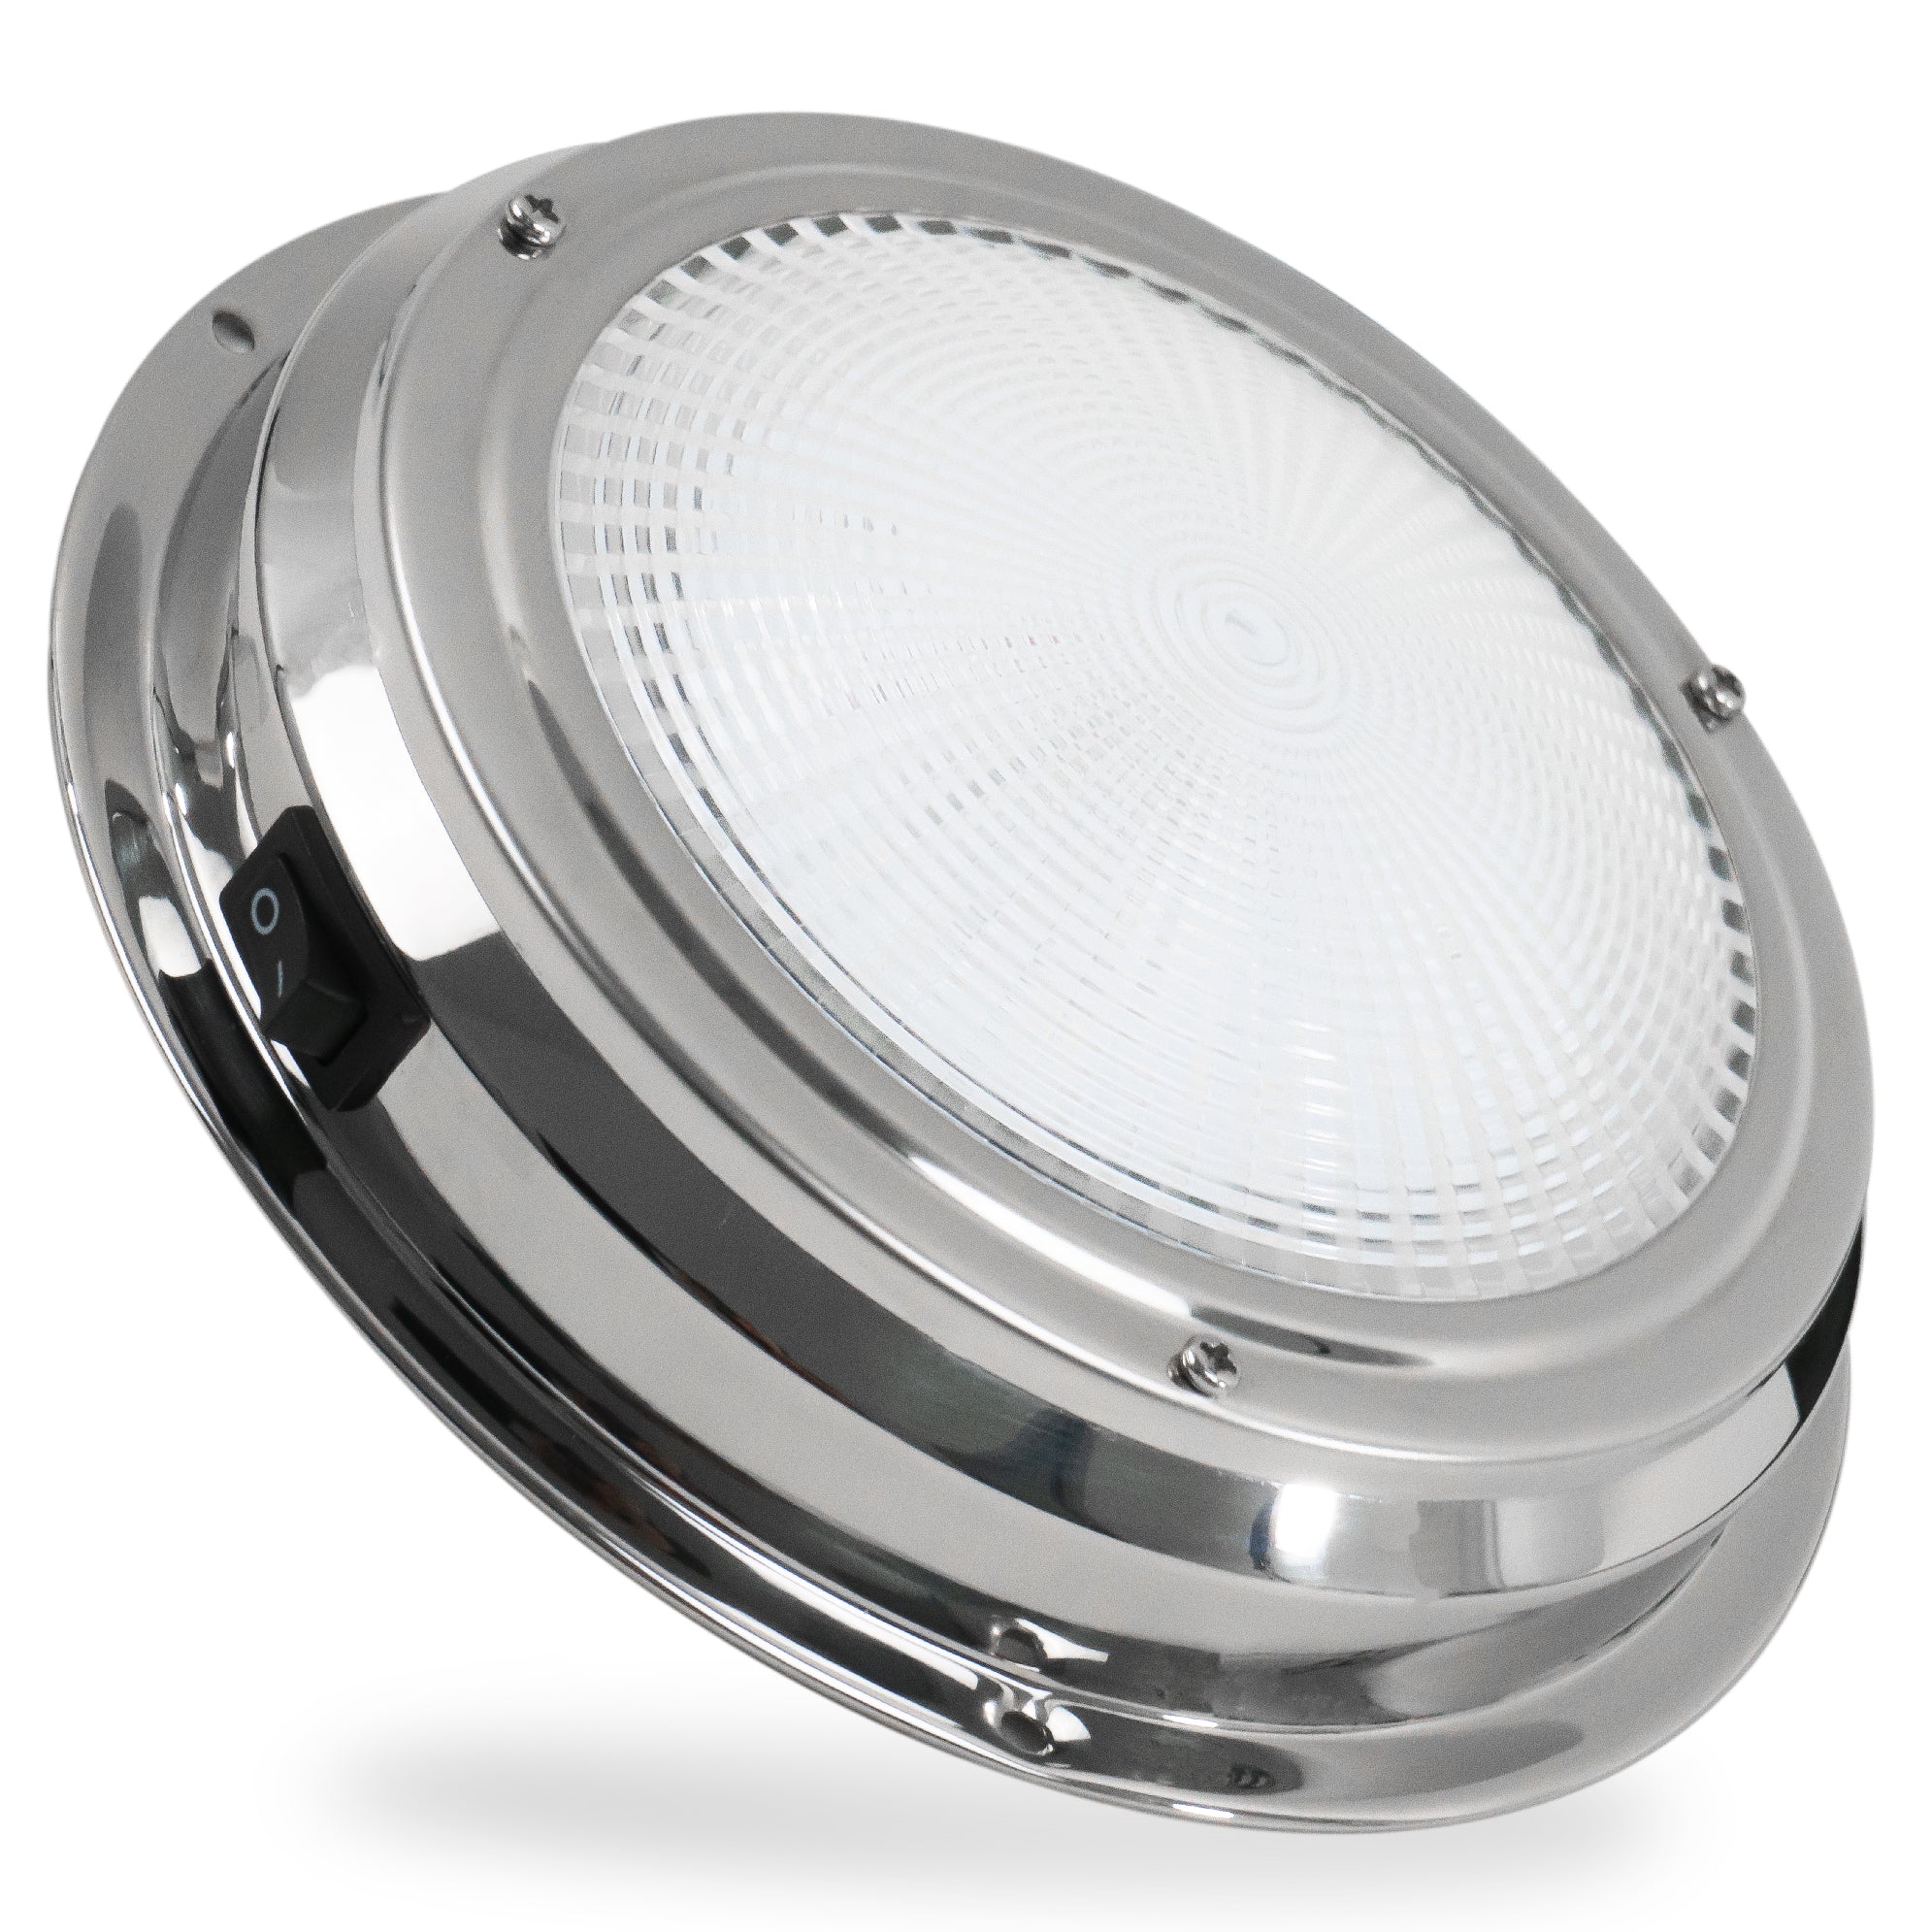 LED Interior Dome Ceiling Light, 6" Surface Mount, Daylight White - FO2625